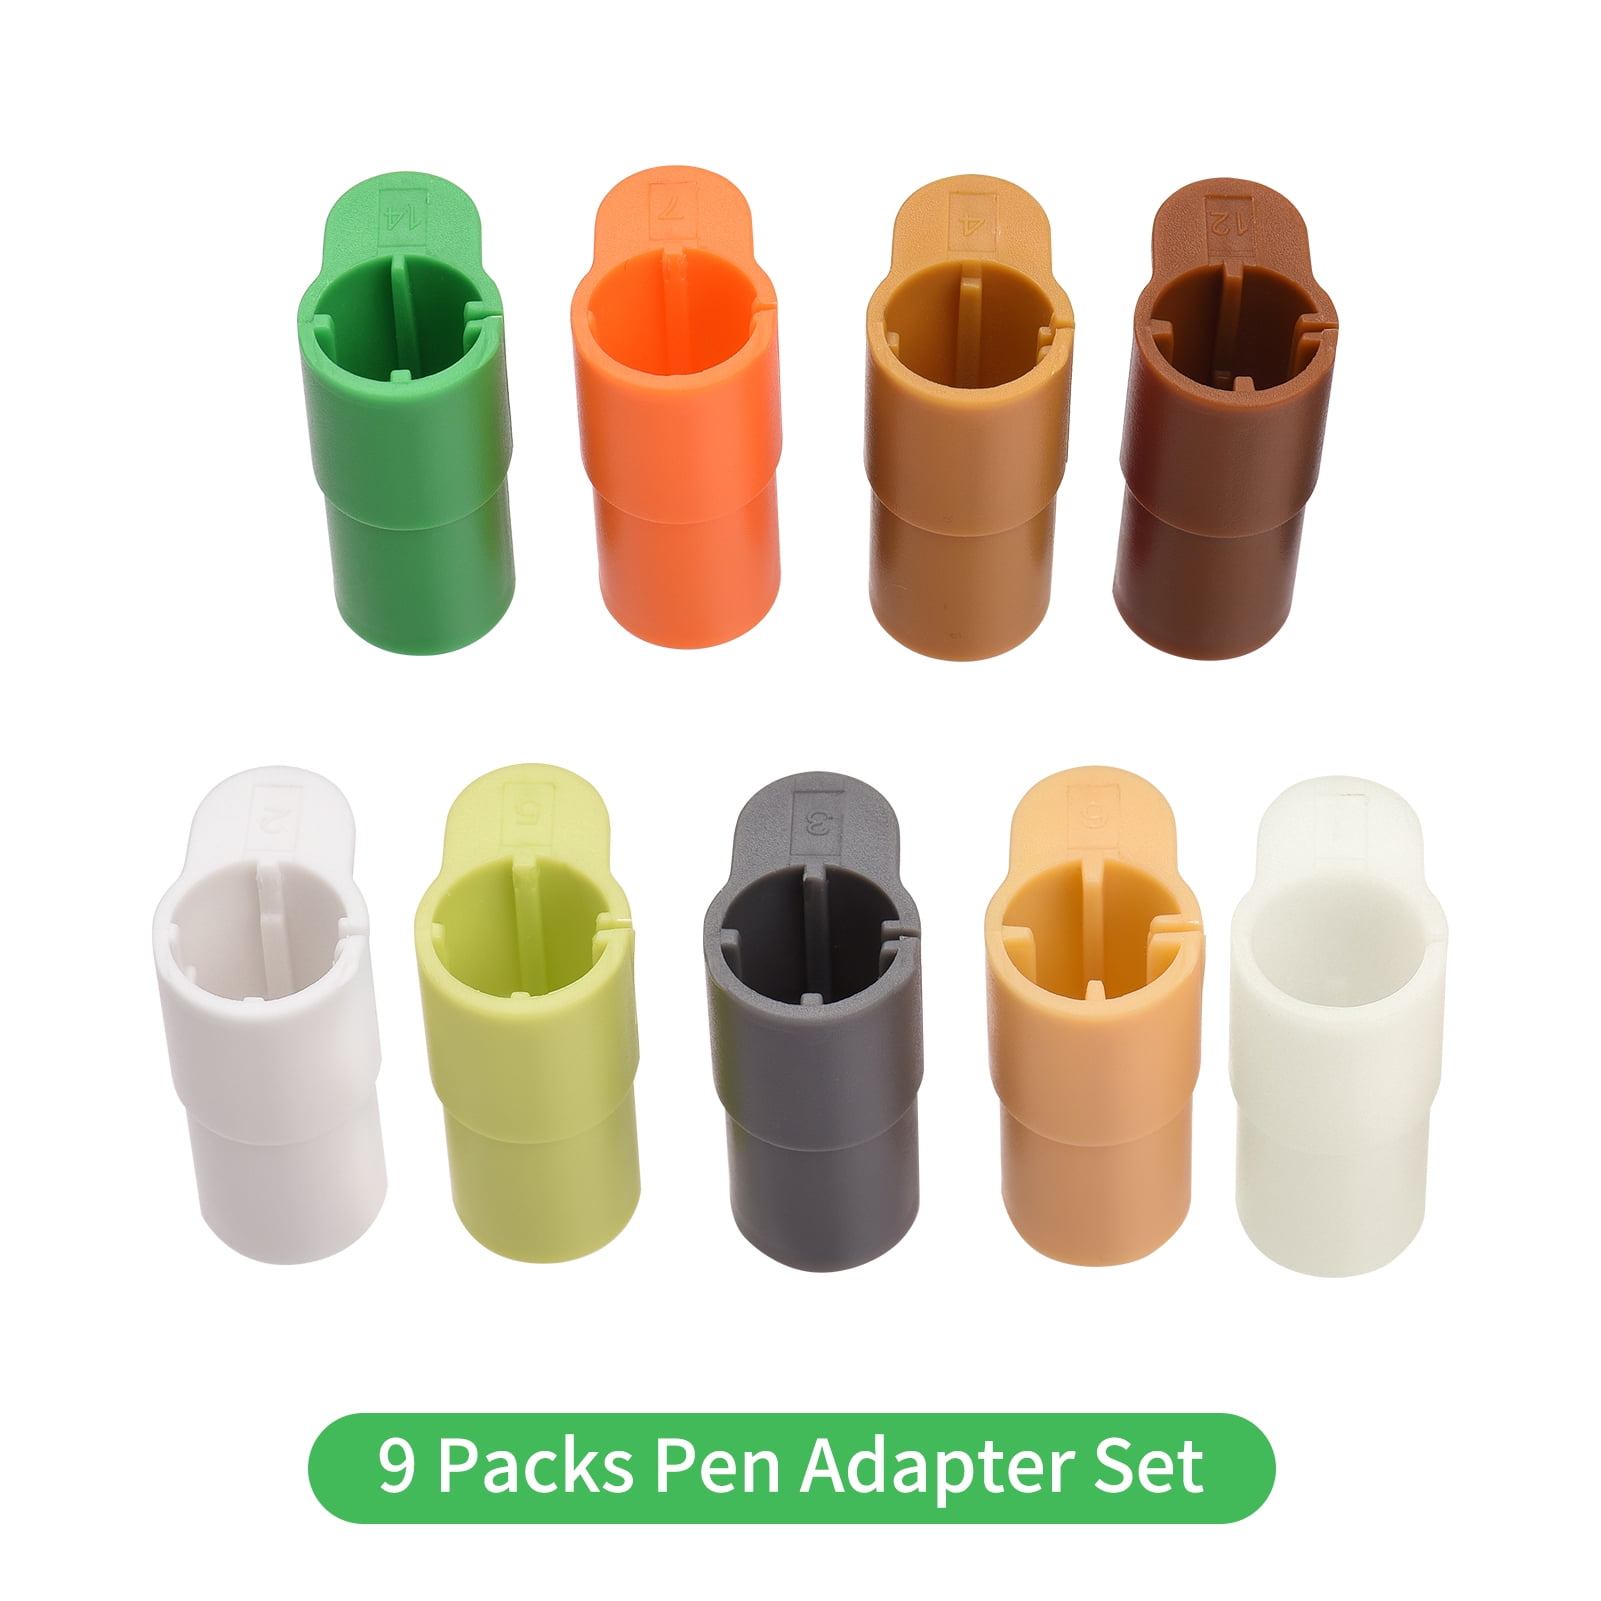 10 Packs Pen/Marker Adapter Set Compatible with Cricut (Explore AIR/AIR 2/Air 3, and Maker/Maker 3),Pen Adapter Compatible with Sharpie/BIC/Crayola